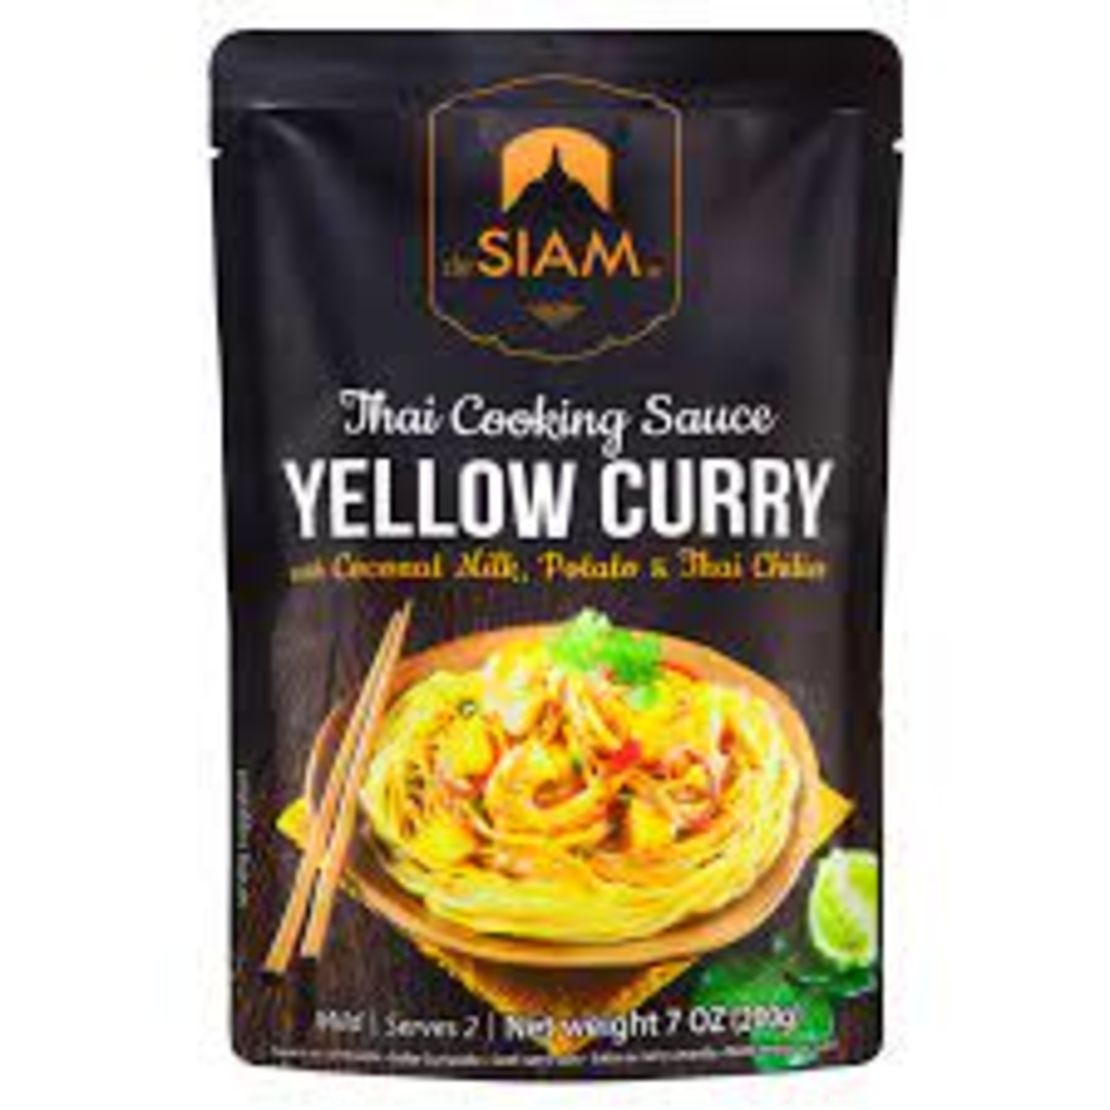 SIAM- yellow curry- thai cooking sauce 